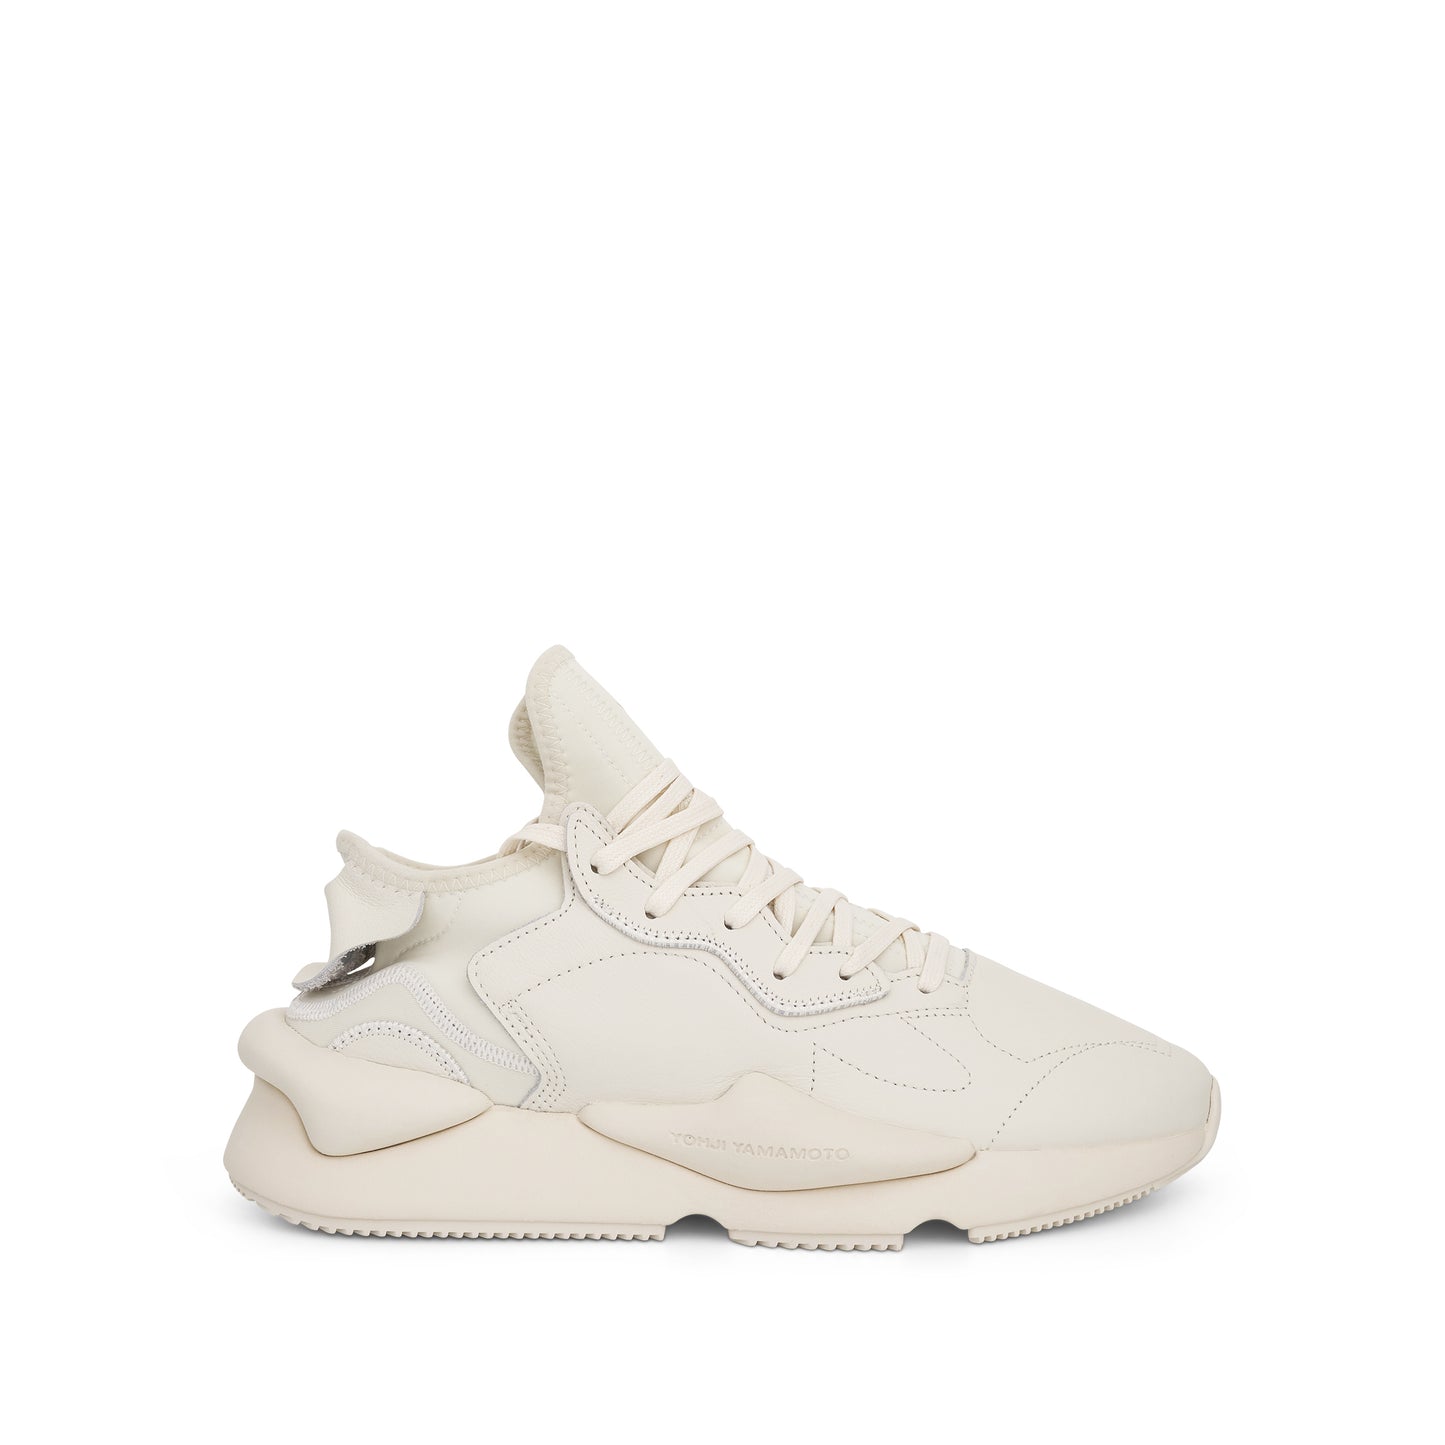 Kaiwa Sneakers in Off White